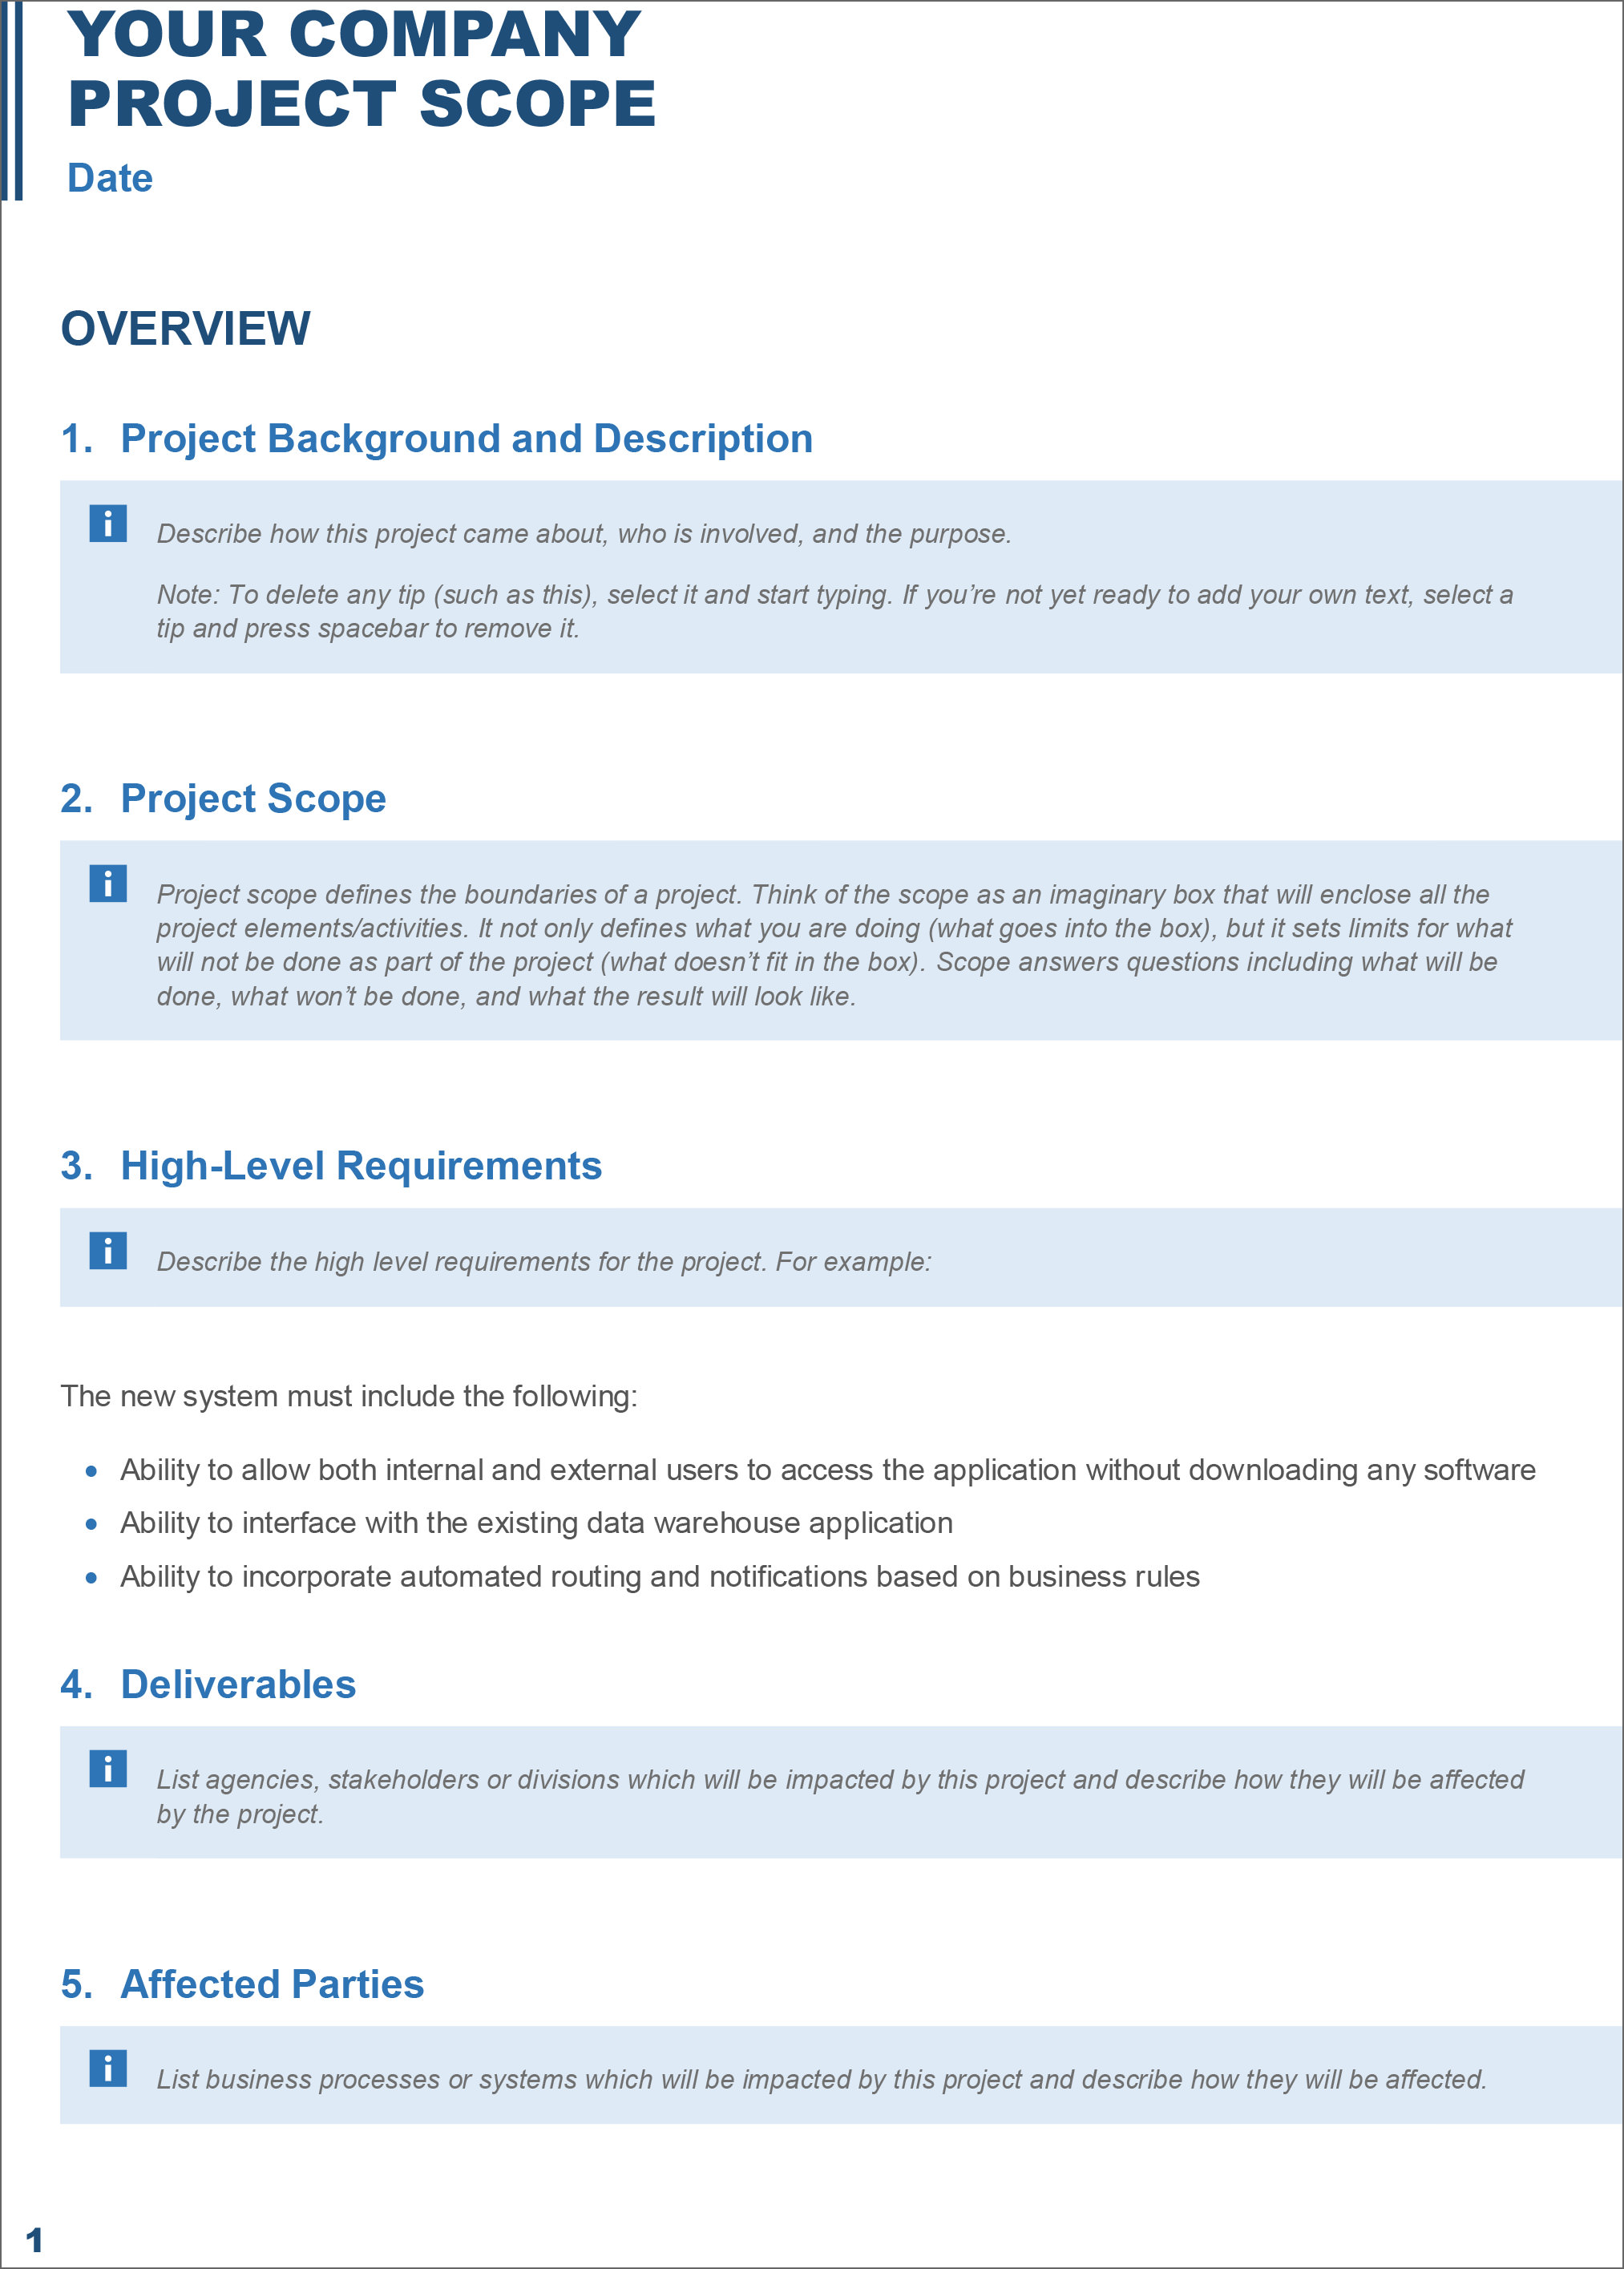 7-free-business-plan-proposal-templates-in-word-docx-and-powerpoint